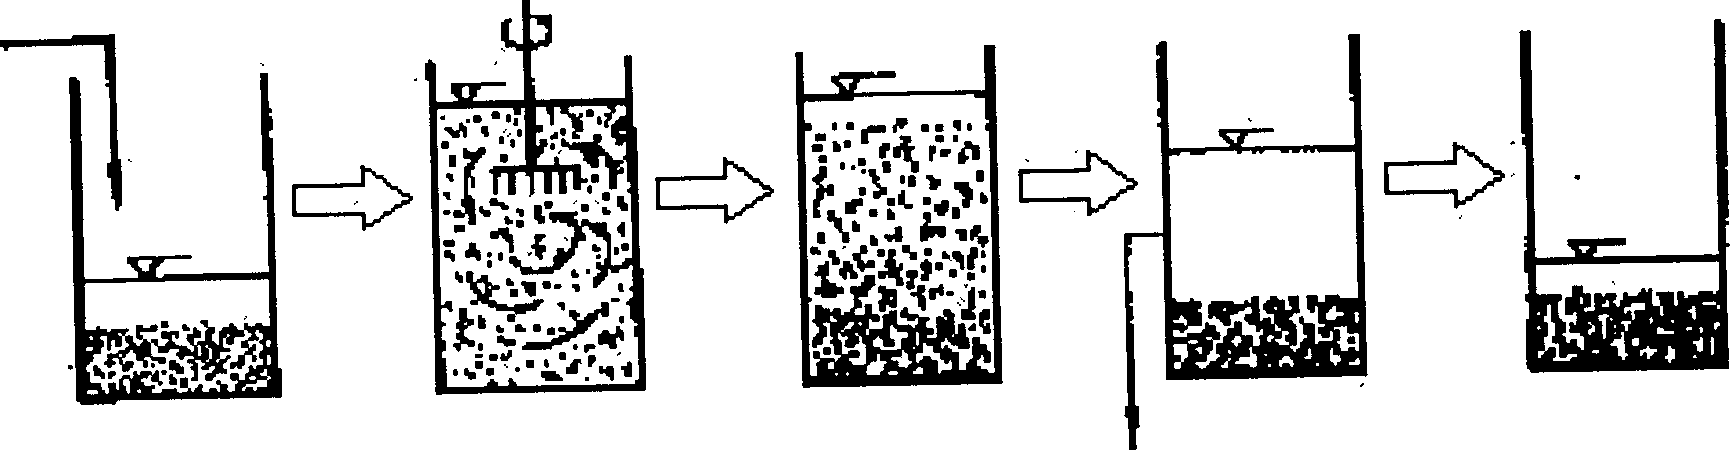 Process and apparatus for wastewater by batched membrane-bioreactor